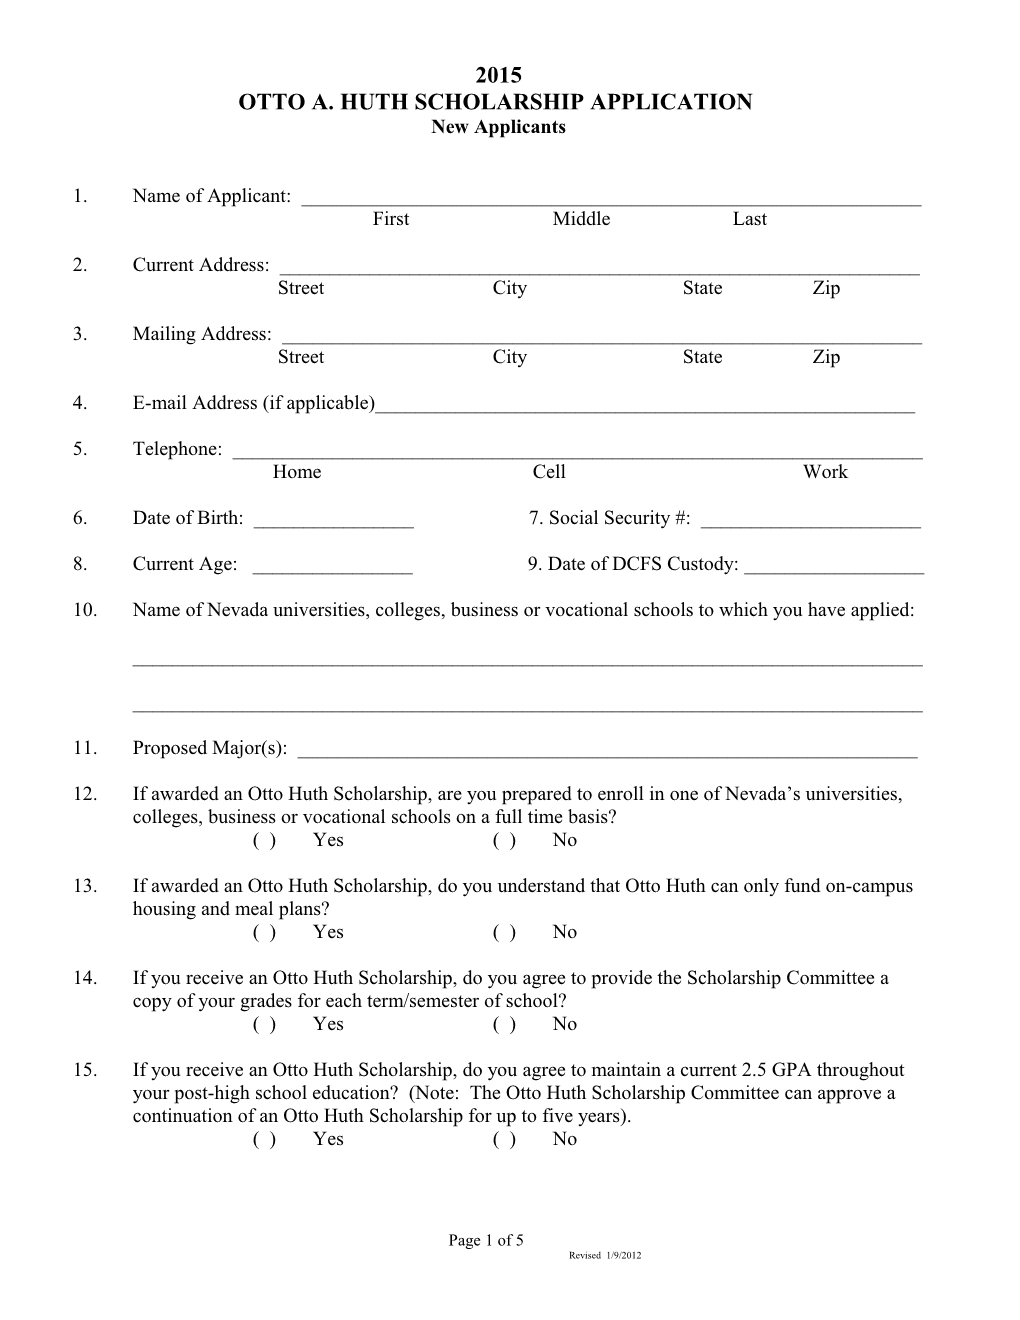 Otto A. Huth Scholarship Application